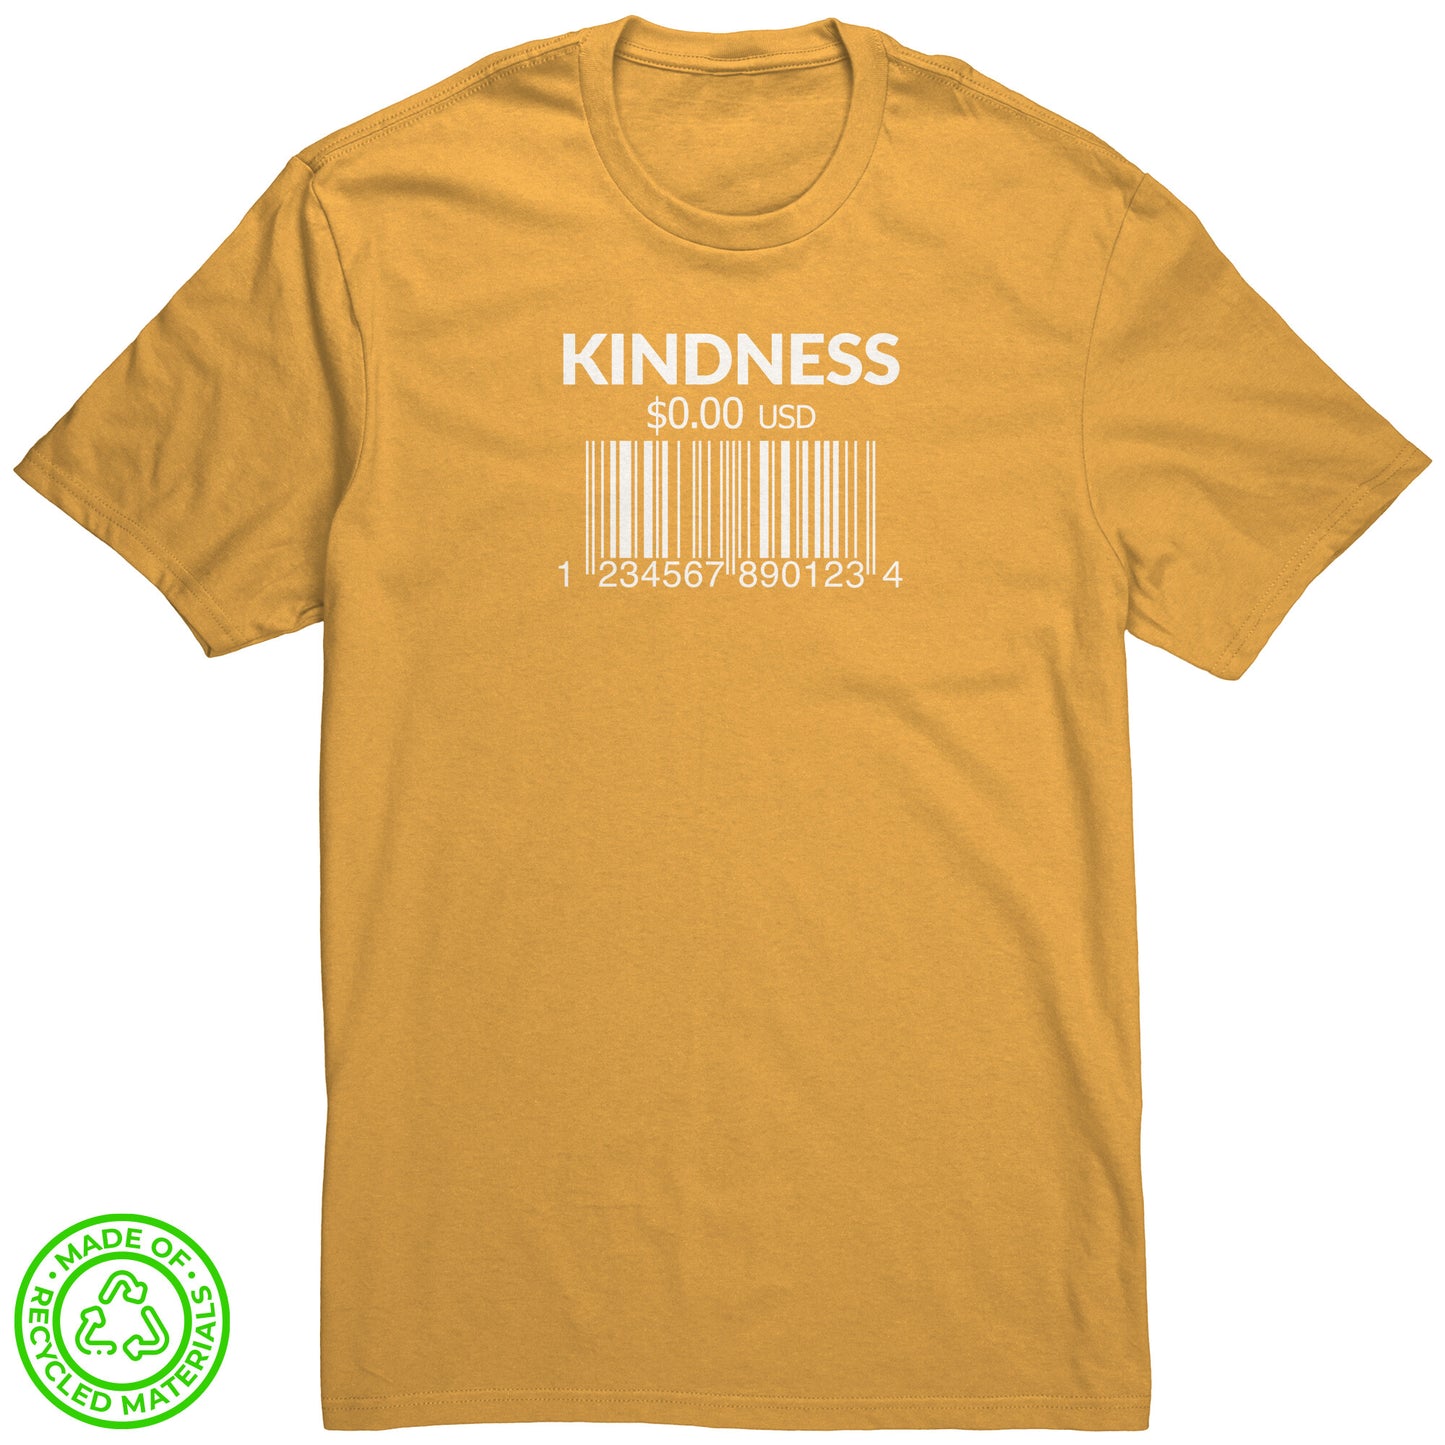 Kindness is Free Recycled Tee